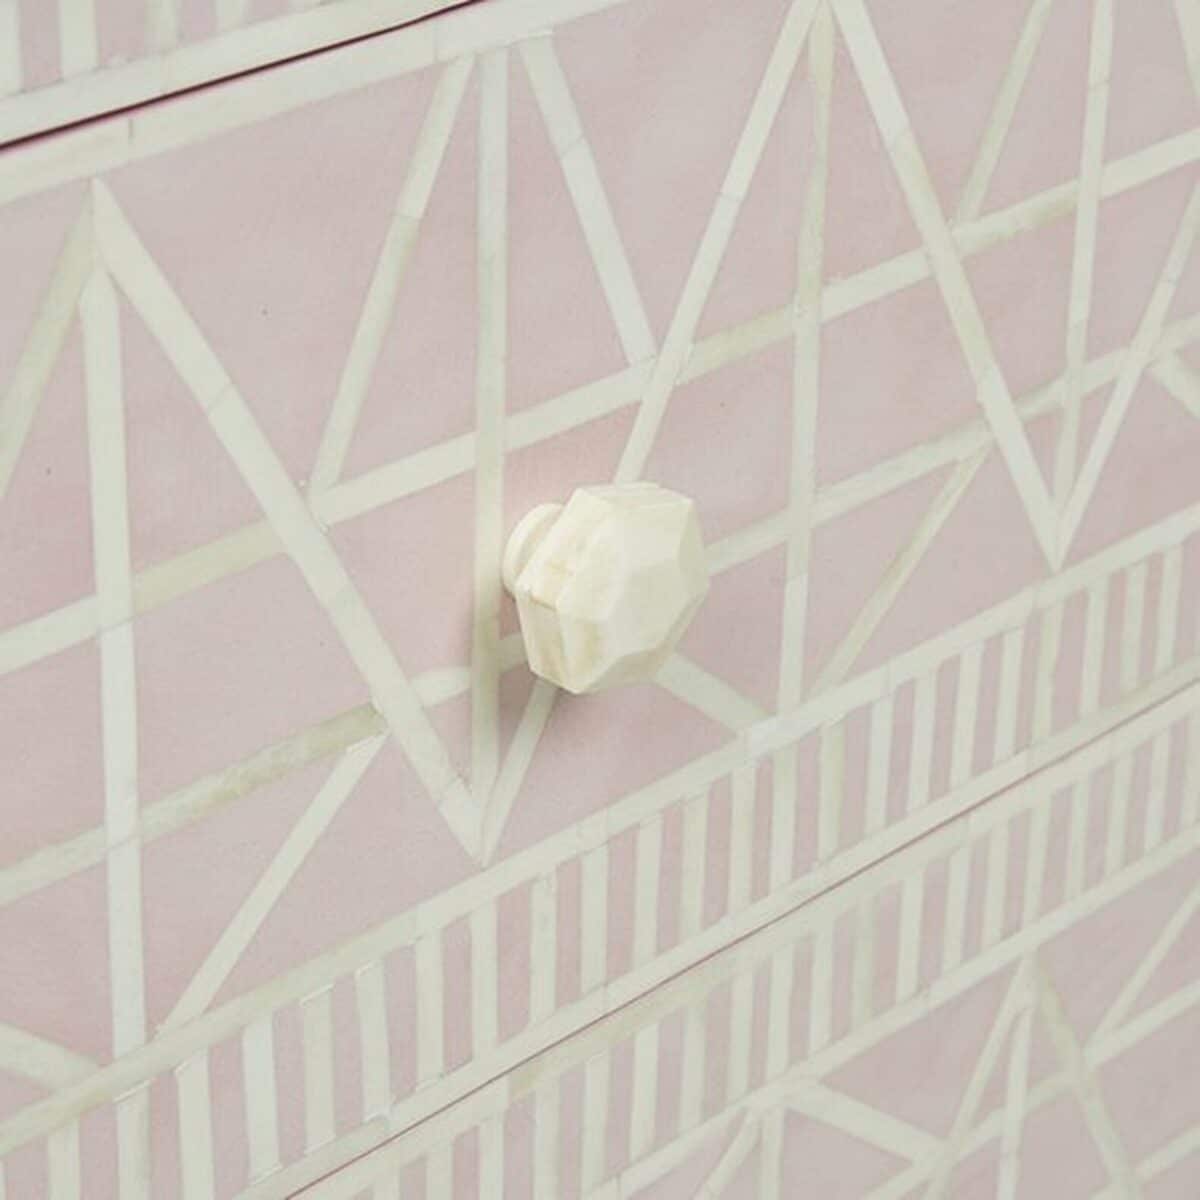 Geometric Design Bone Inlay Chest of 2 Drawers in Soft Pink